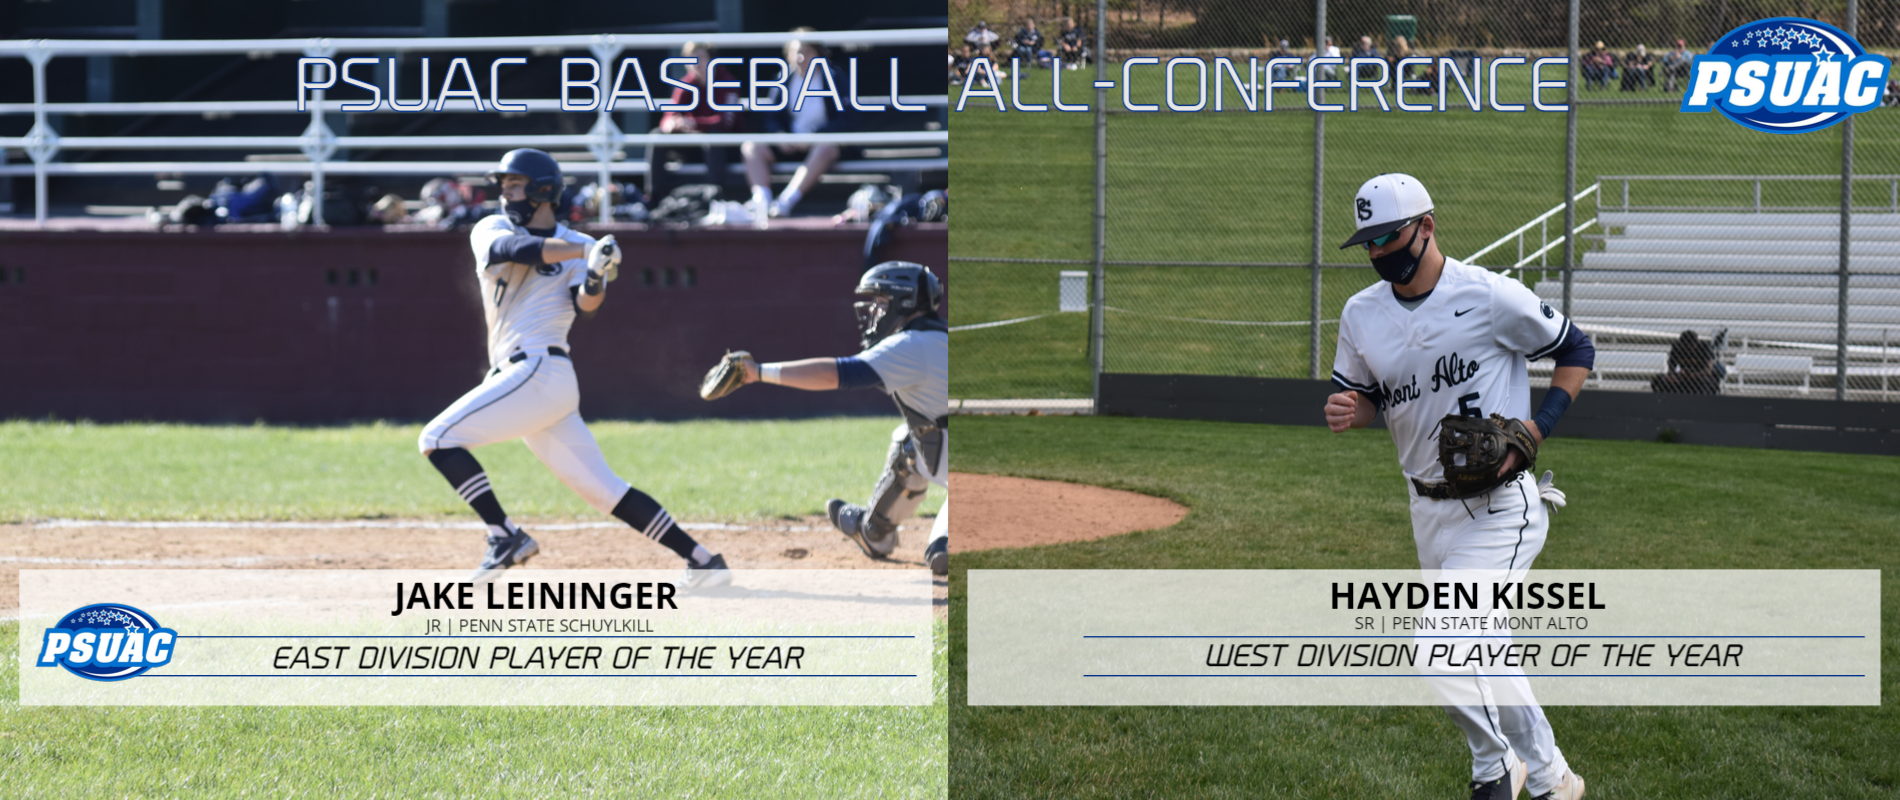 Penn State Schuylkill's Jake Leininger and Penn State Mont Alto's Hayden Kissel were named Players of the Year in their respective divisions.